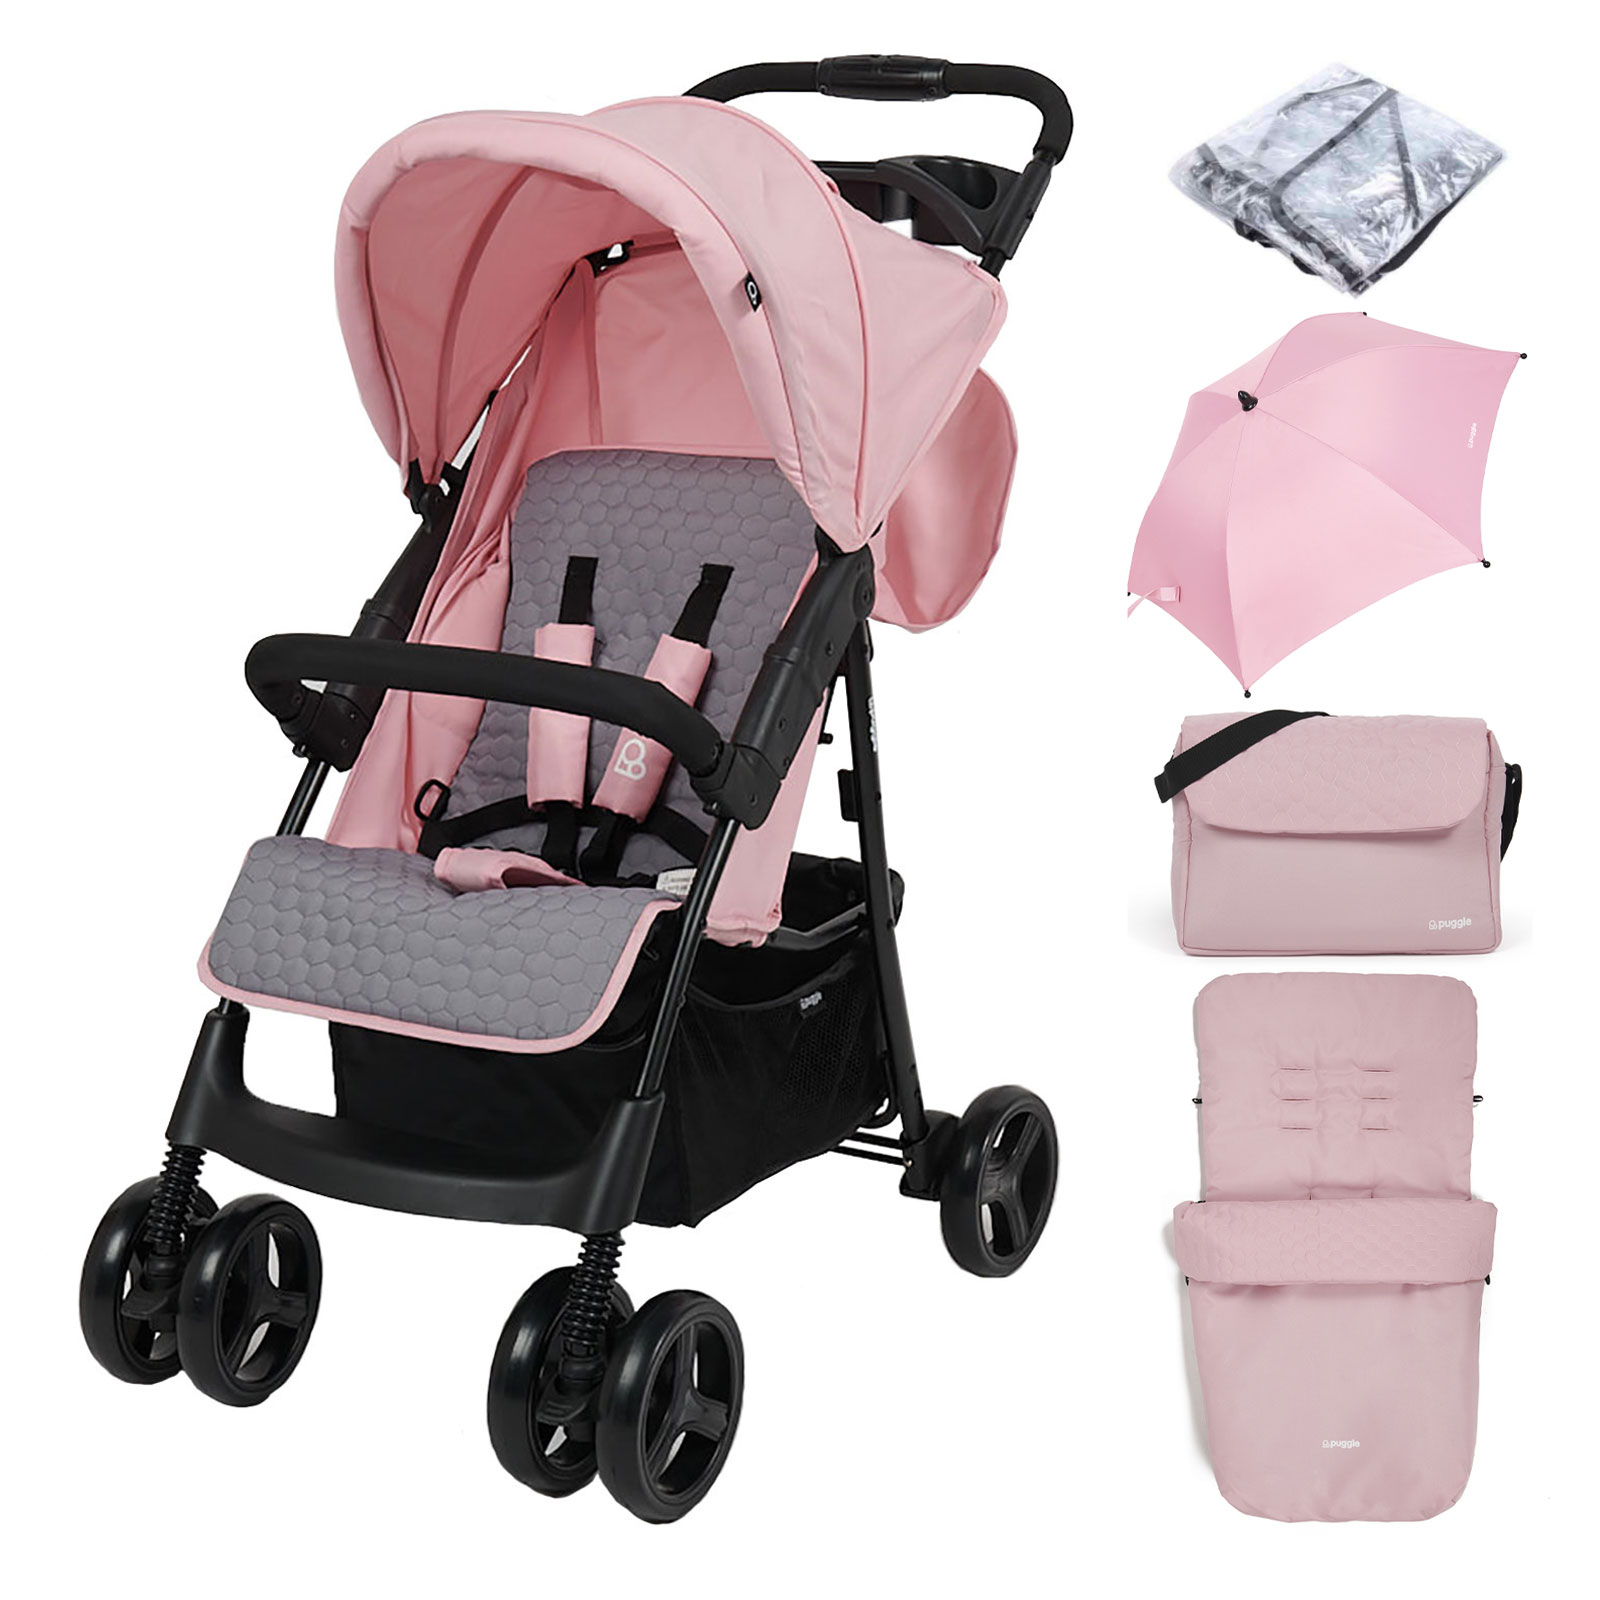 Puggle Starmax Pushchair Stroller with Raincover, Universal Footmuff, Parasol and Changing Bag with Mat – Vintage Pink